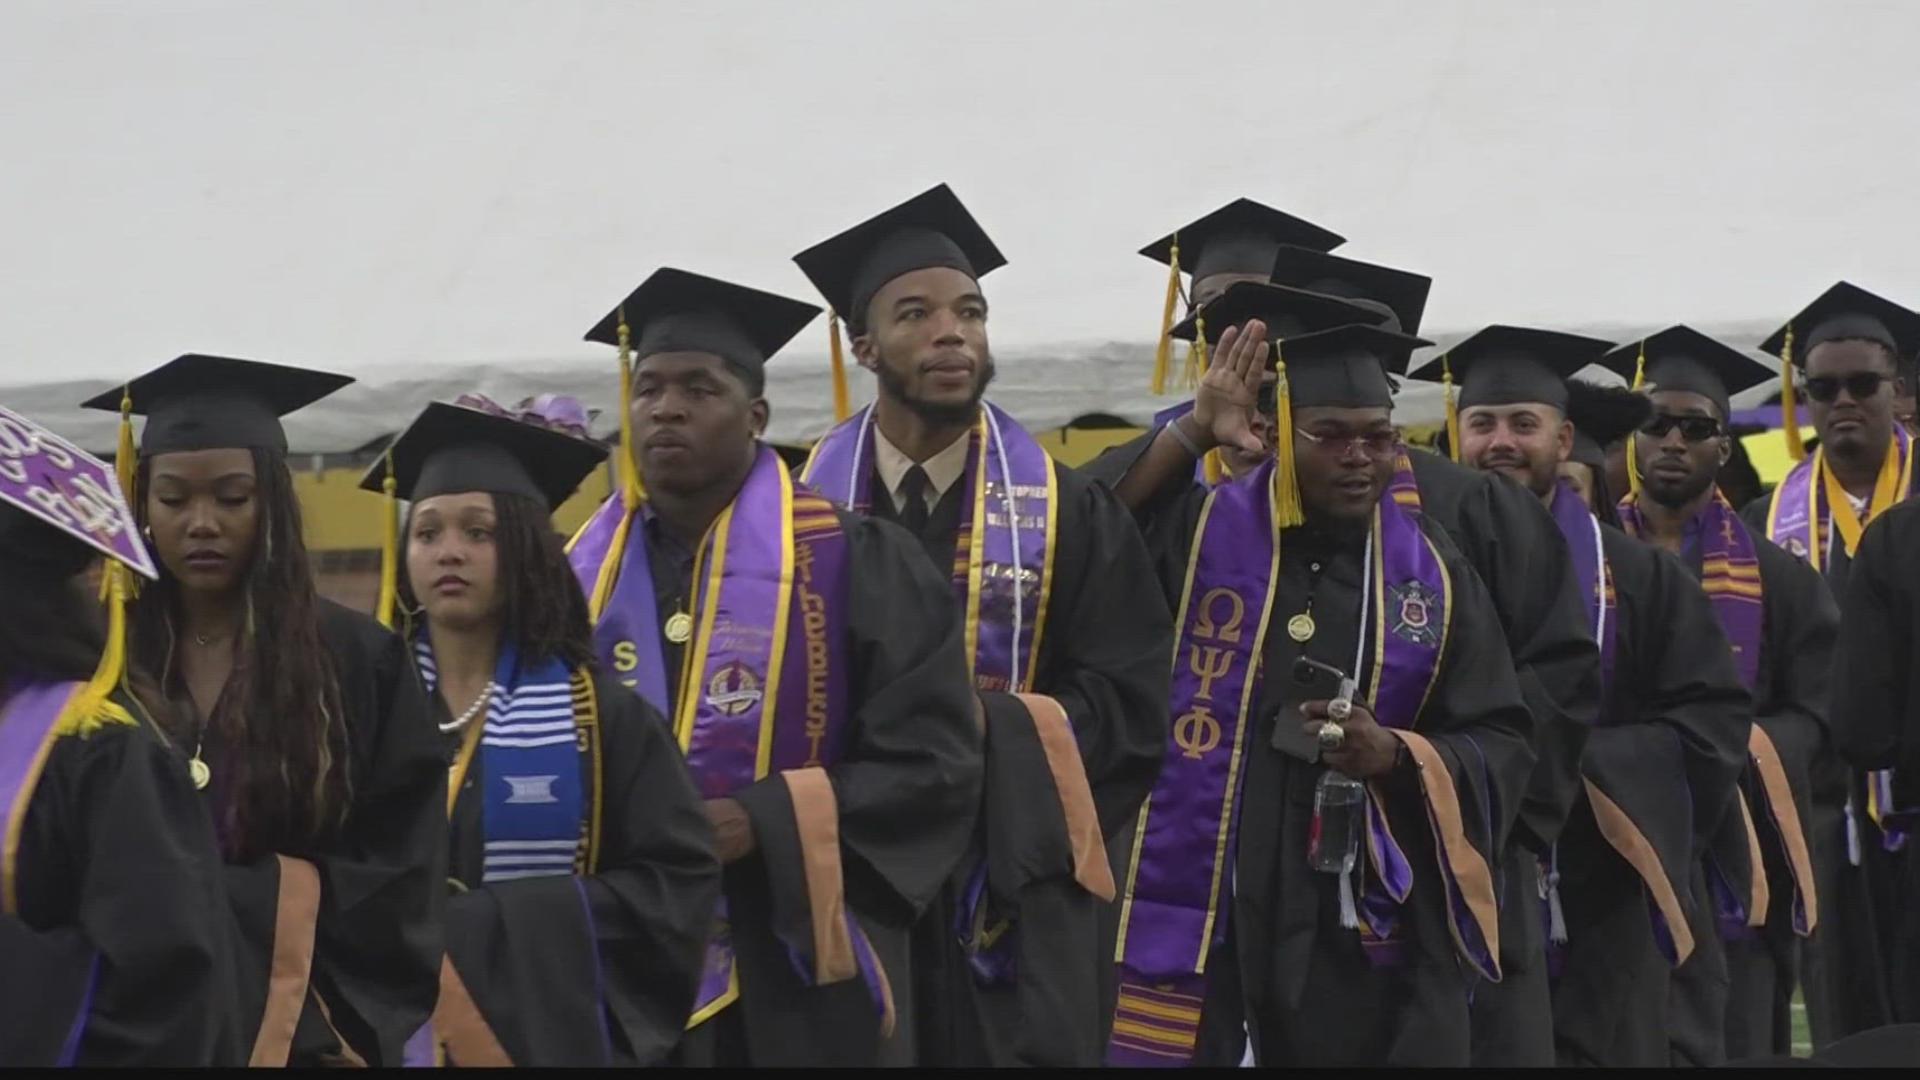 With Benedict College and the University of South Carolina having graduations in the same weekend in Columbia businesses are expecting a big rush.